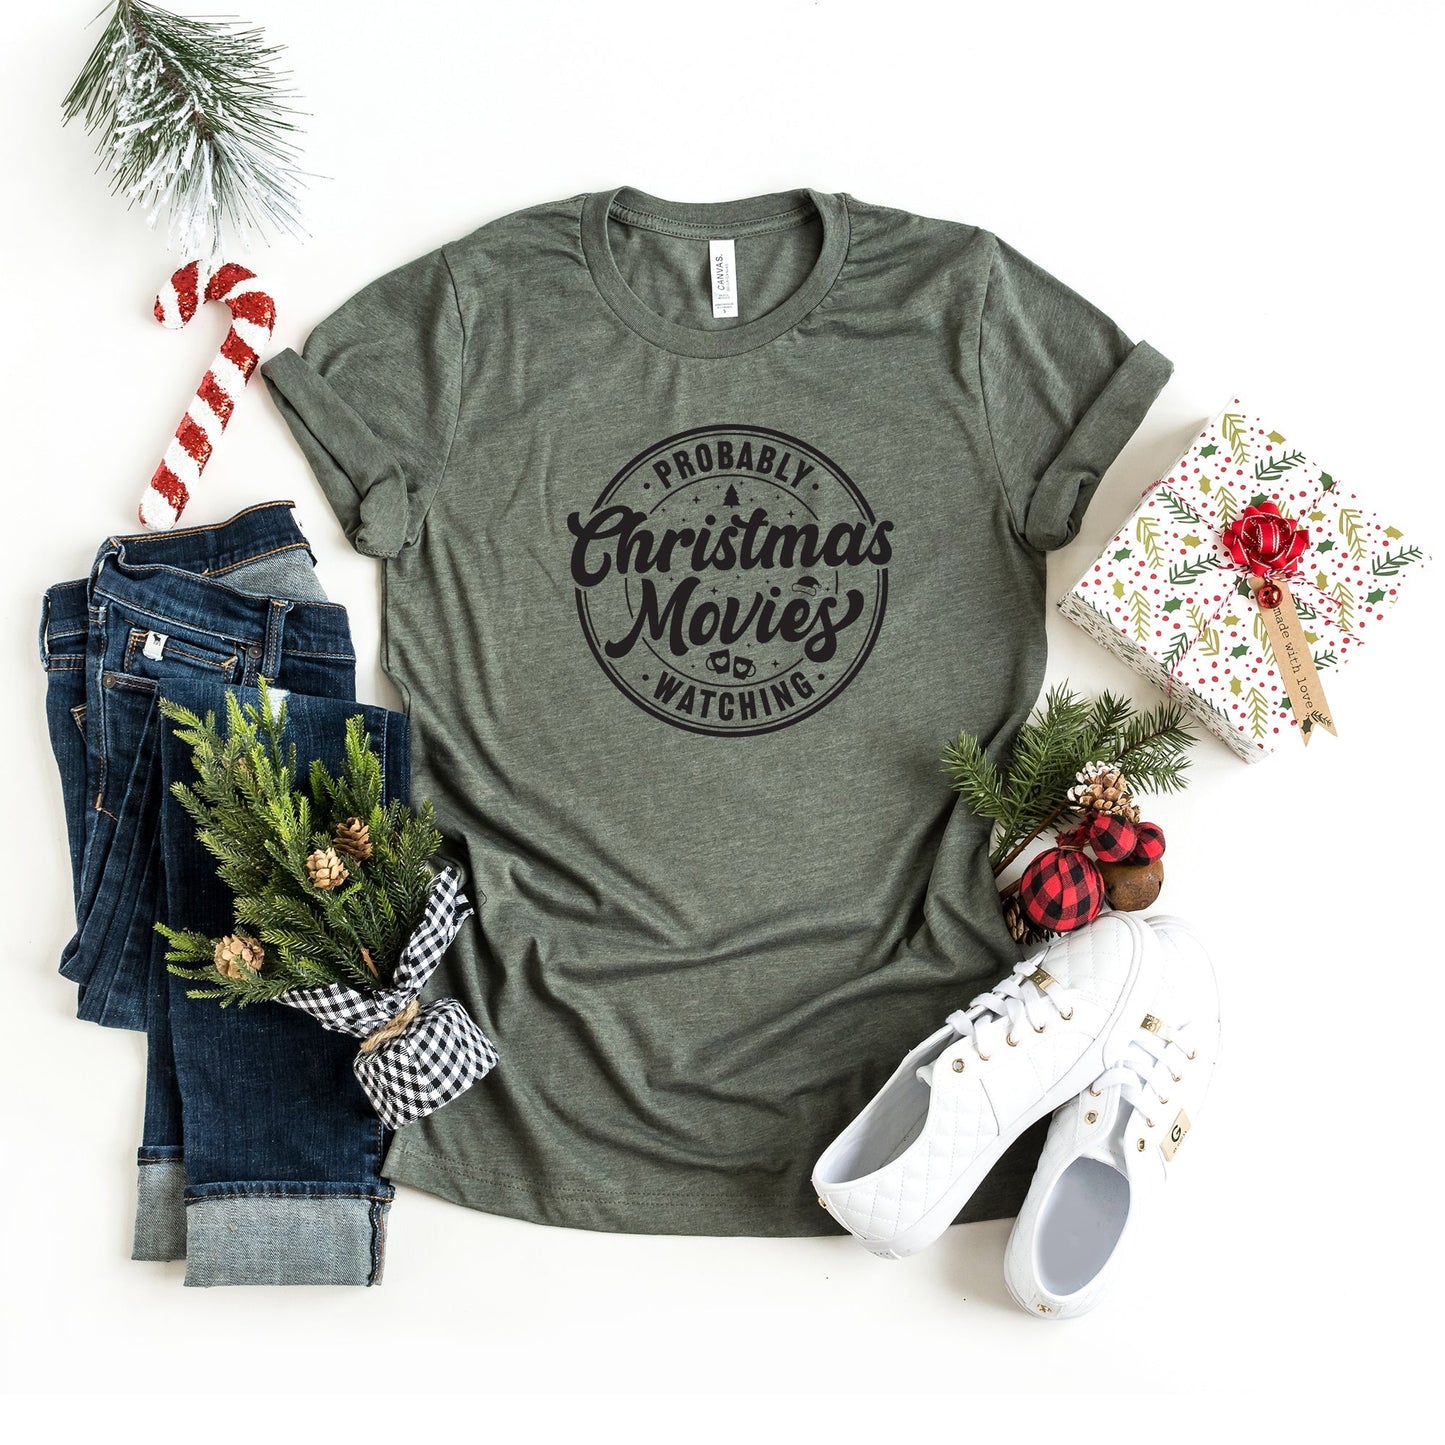 Probably Watching Christmas Movies | Short Sleeve Crew Neck